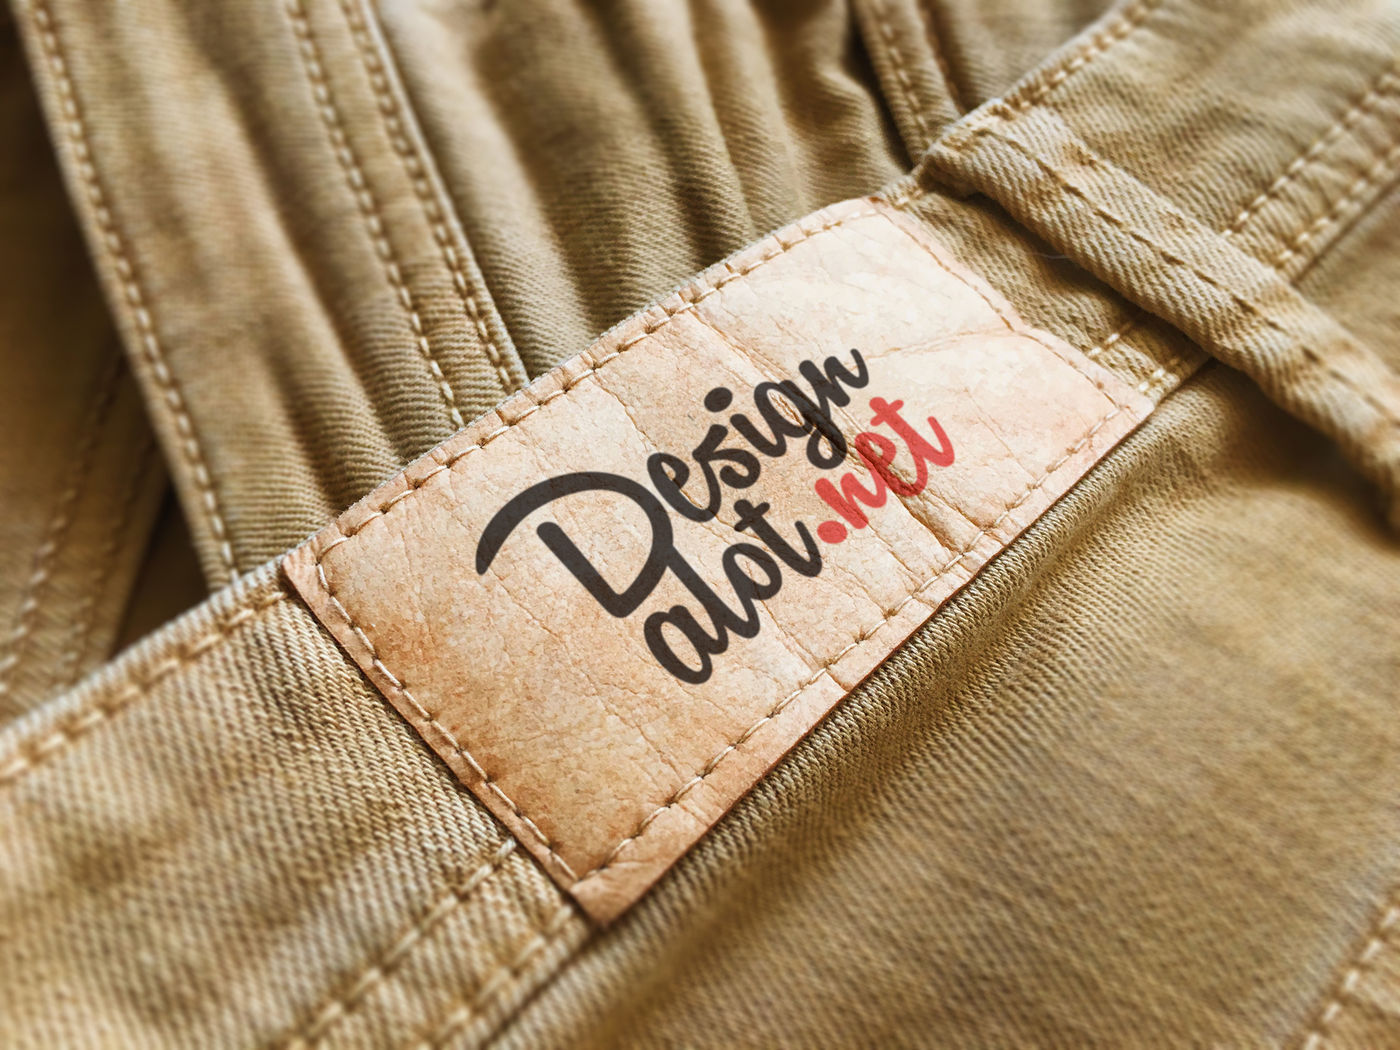 Download 7 Jeans and Pants Label Mockups By Design a Lot | TheHungryJPEG.com